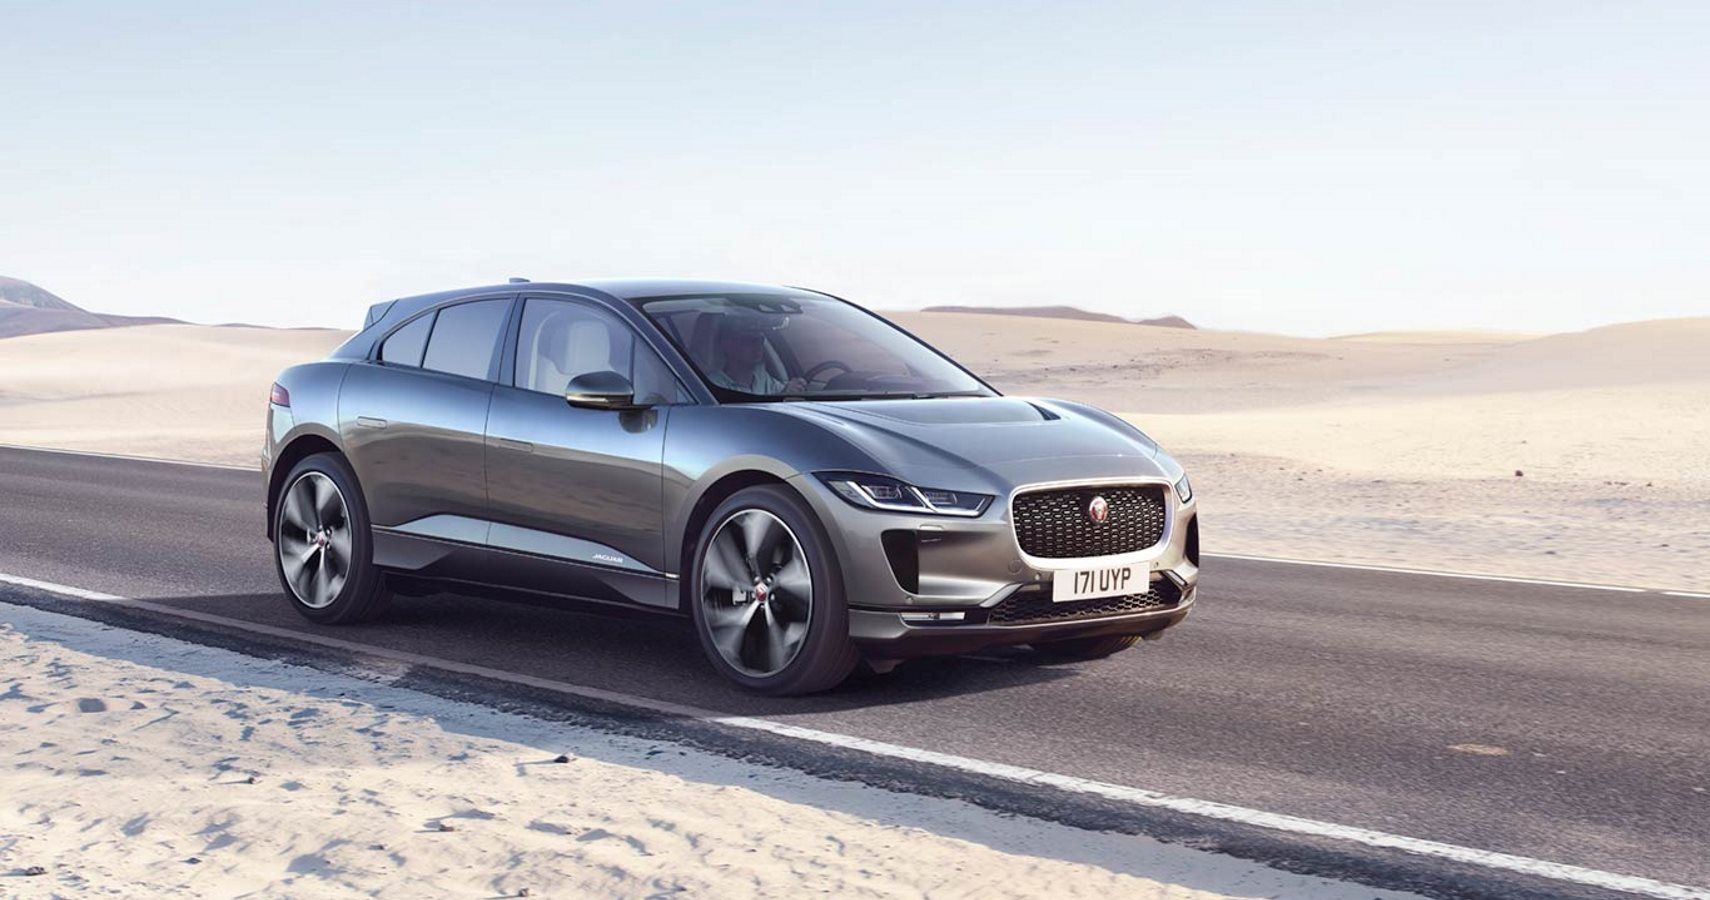 2019 Jaguar I-Pace Revealed With Serious Range